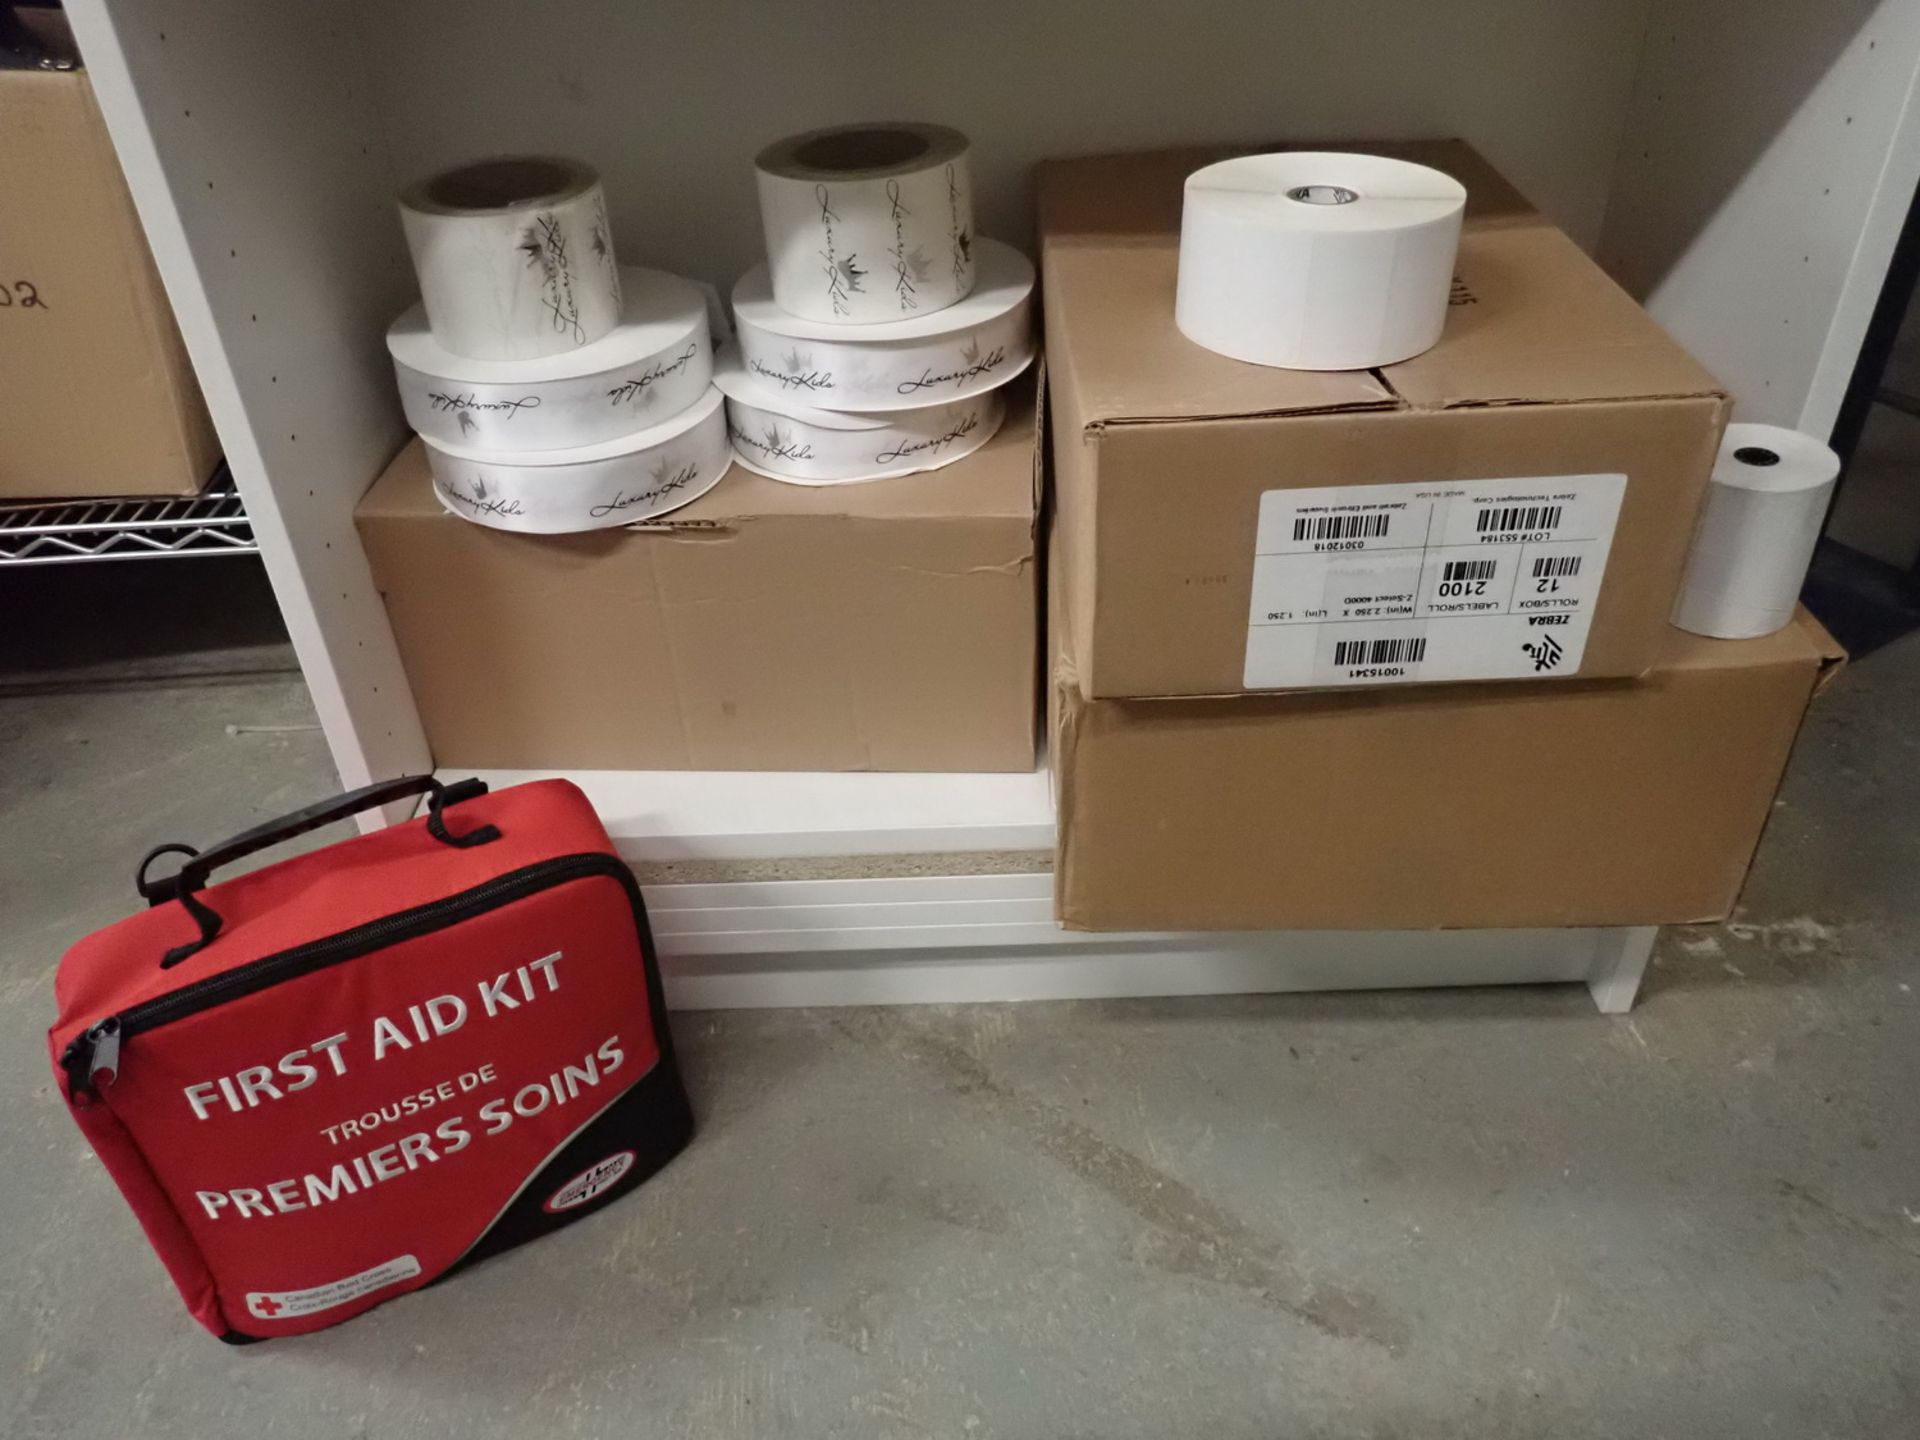 LOT - FIRST AID KIT, MICROWAVE, WHITE STICKER ROLLS, & RIBBON